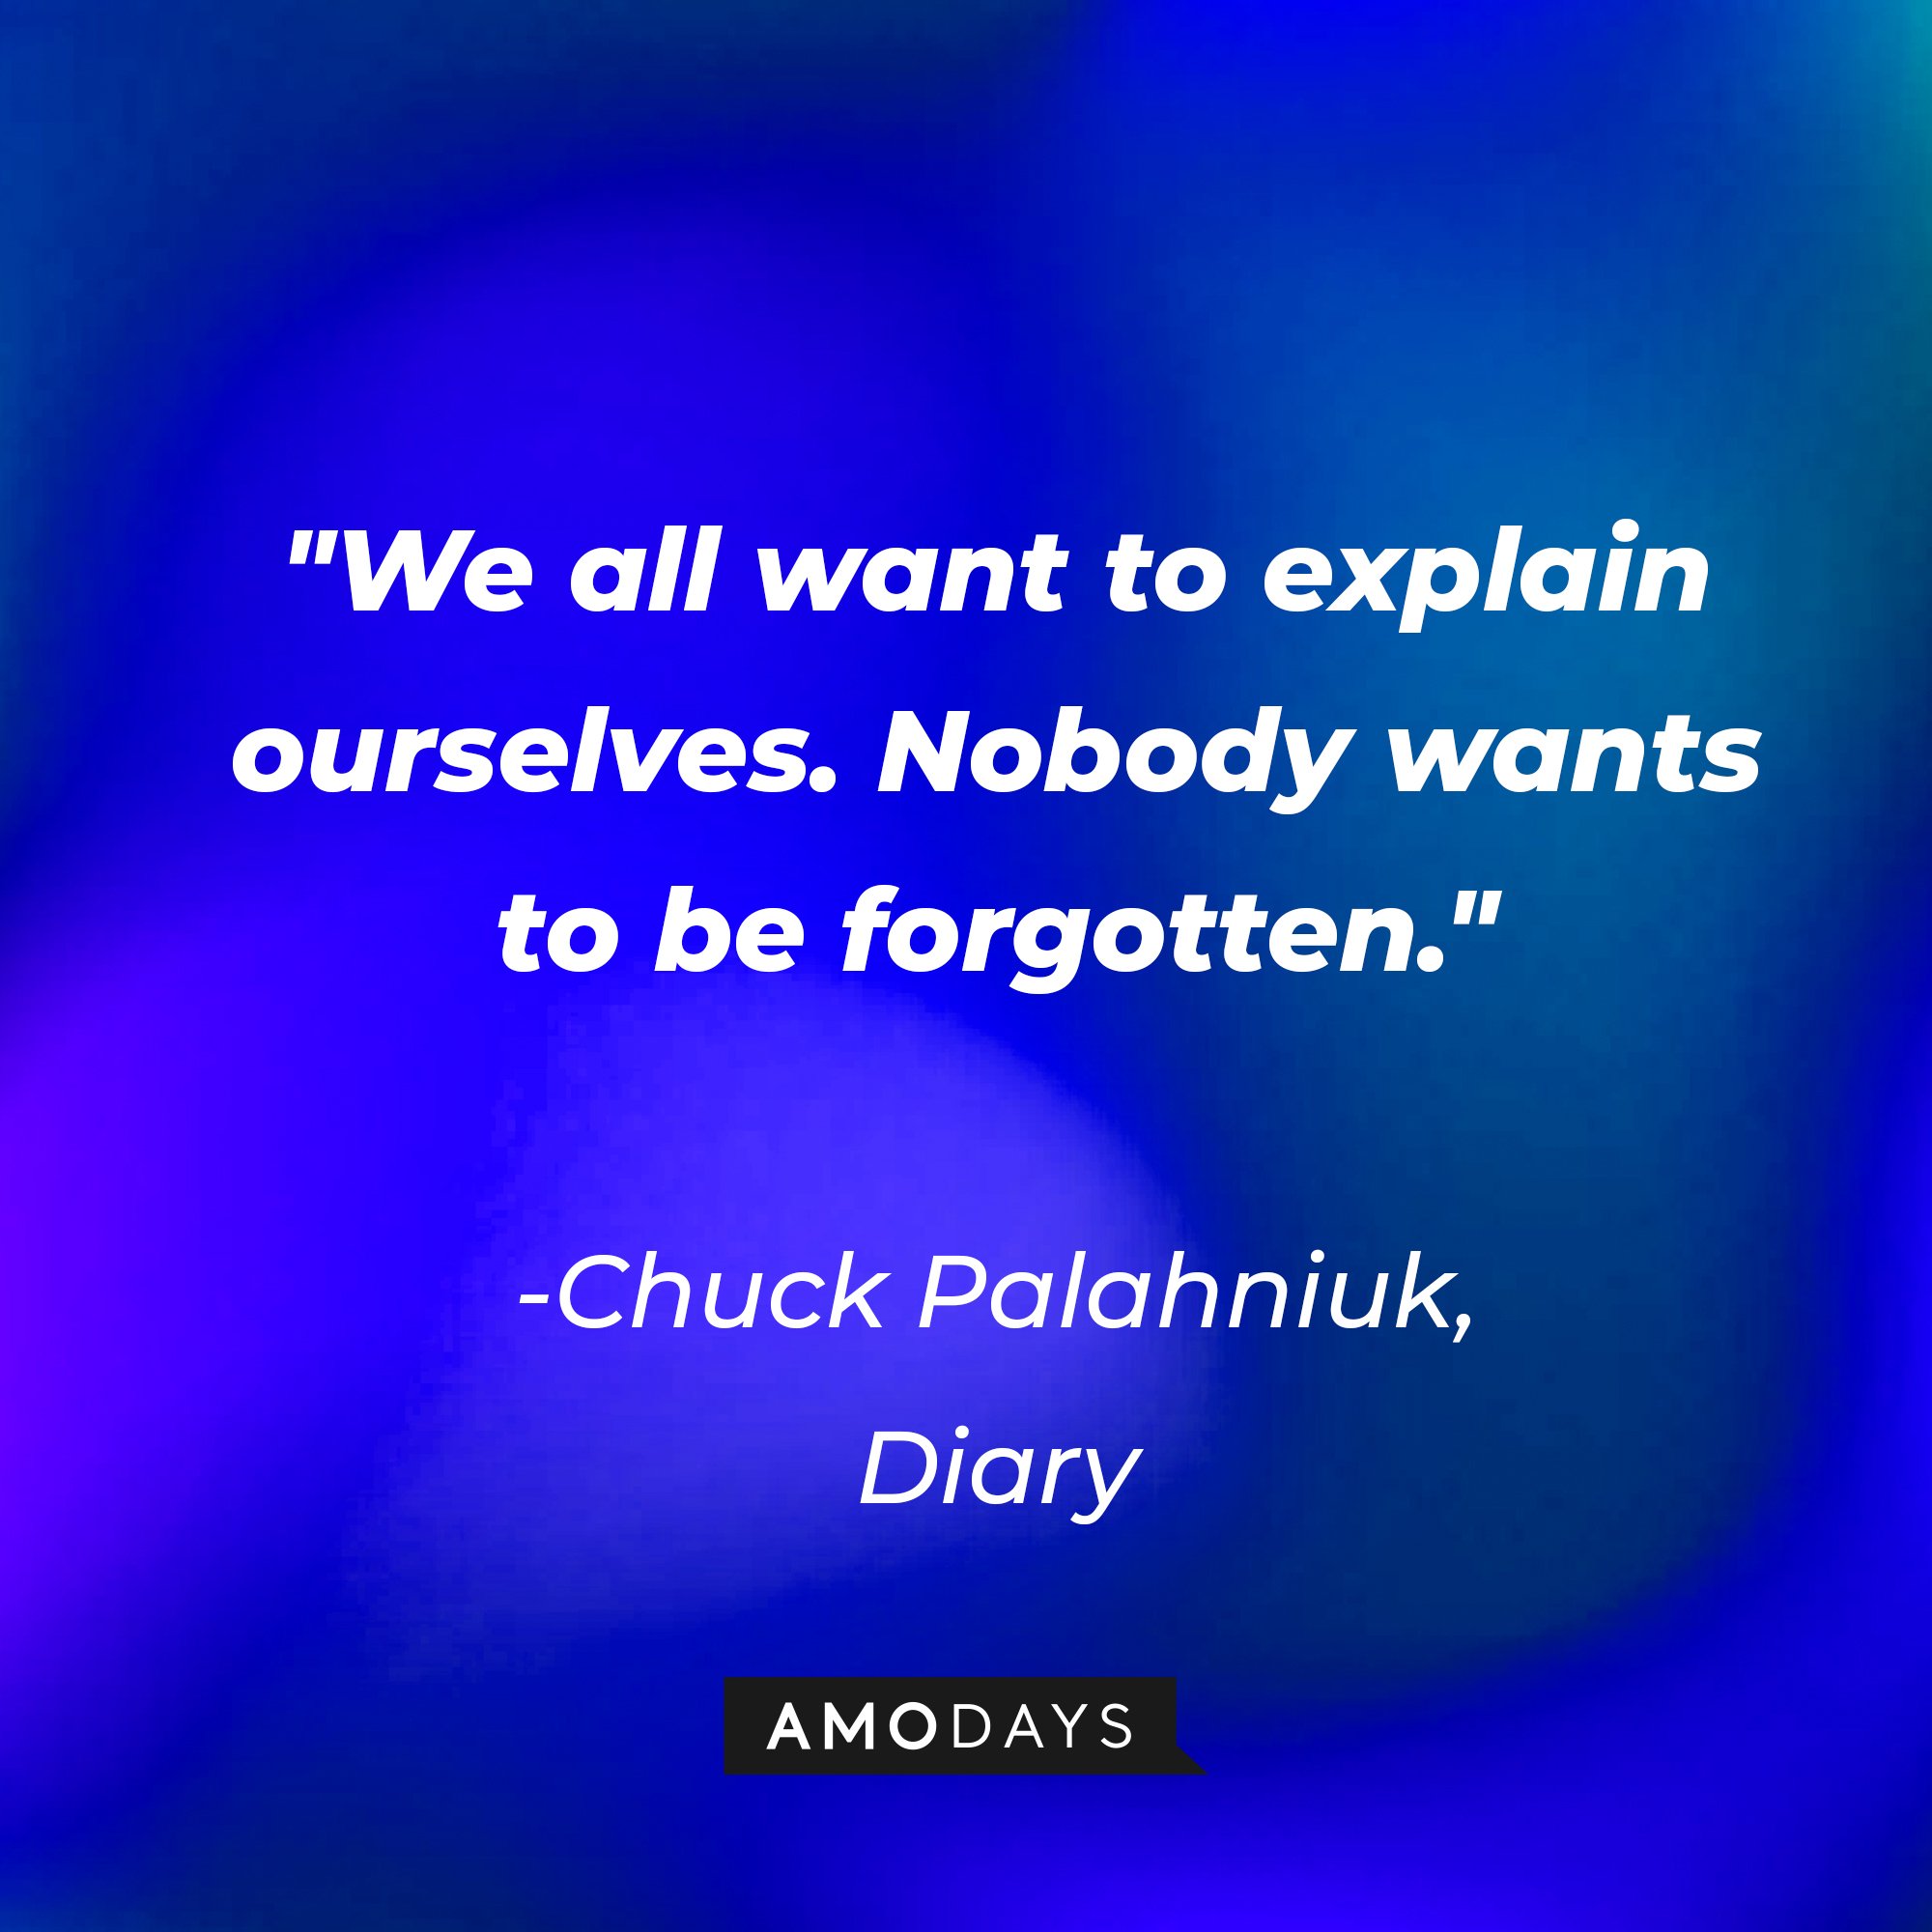 Chuck Palahniuk's quote: "We all want to explain ourselves. Nobody wants to be forgotten." | Image: Amodays